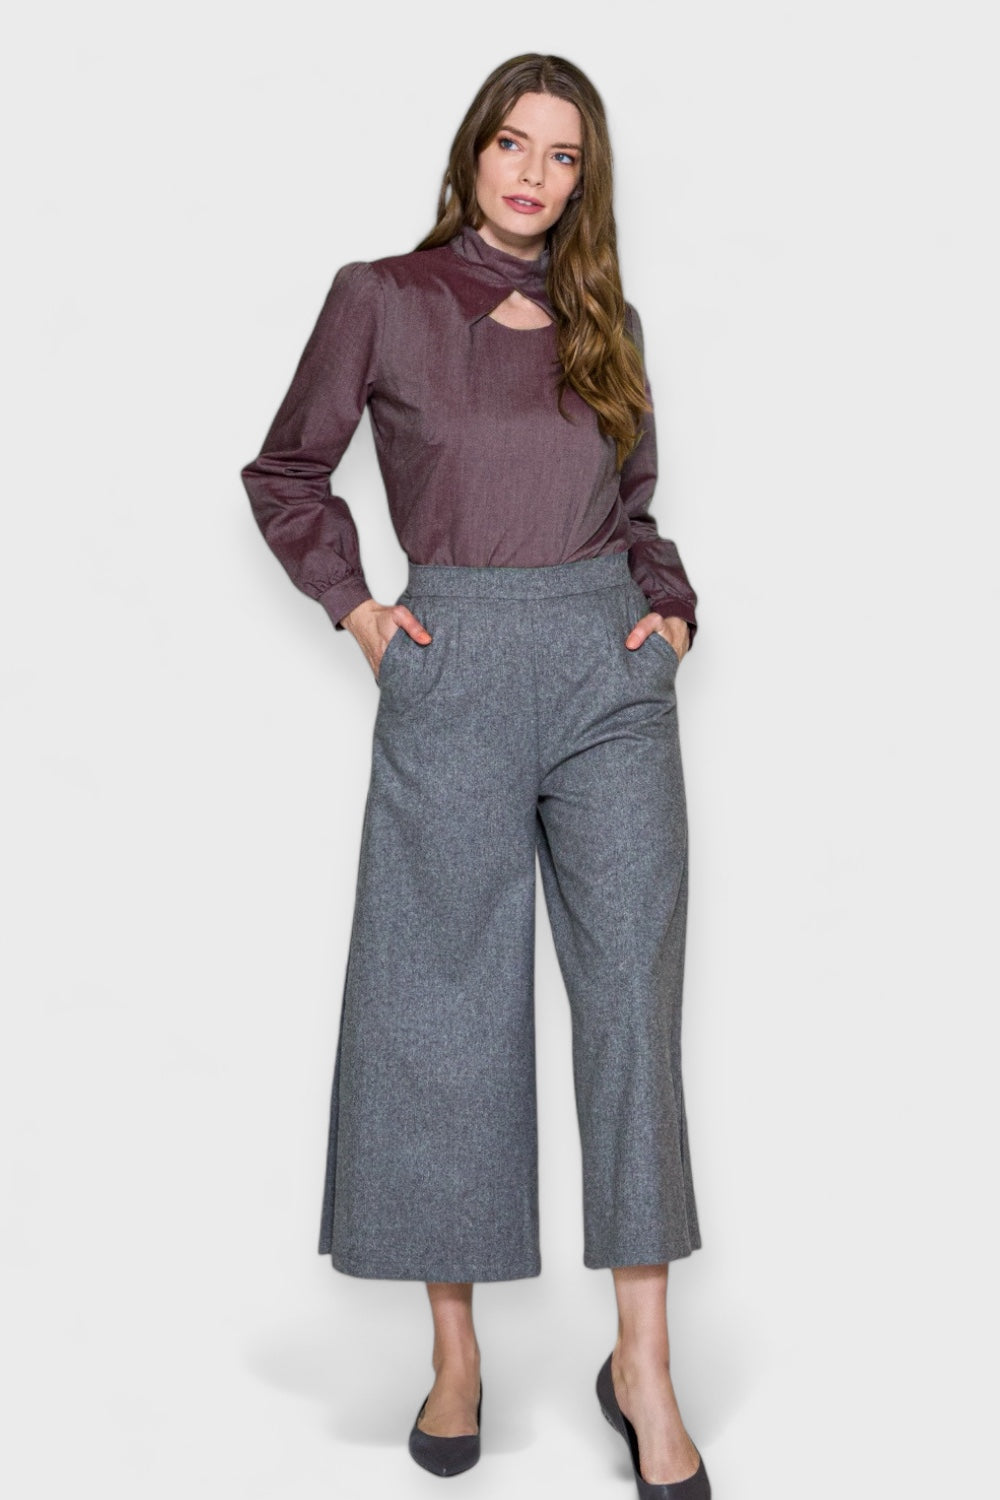 Milan Gray Organic Wool Wide-Leg Pants by Marise.Eco.Couture Italian Women's Clothing Paired with Mona Blouse